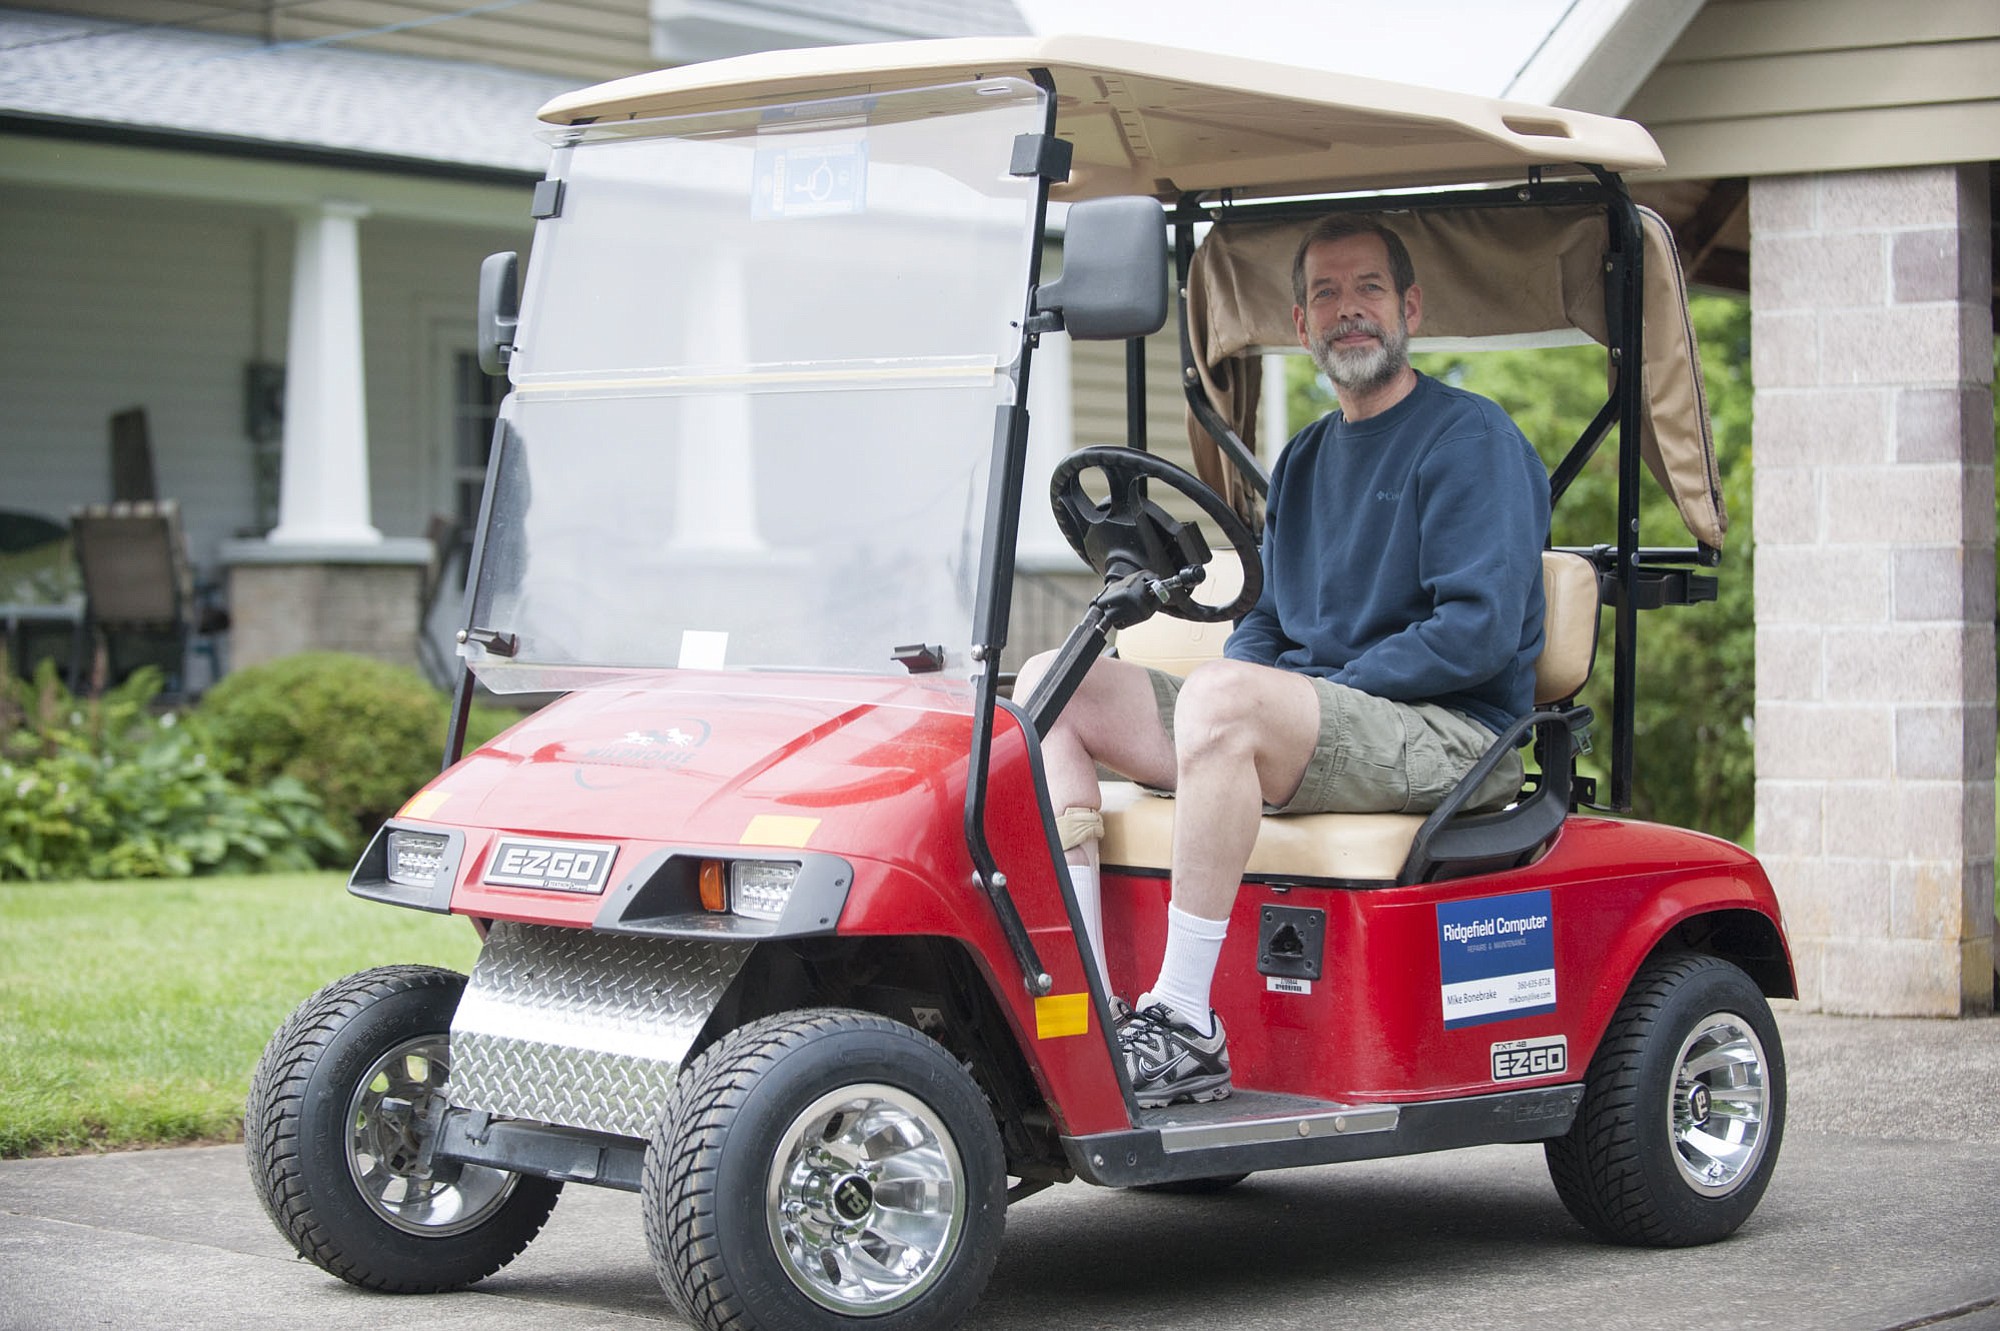 Ridgefield resident Mike Bonebrake fought for more than a year to see a golf cart zone implemented  in the city. That vision became a reality this month.